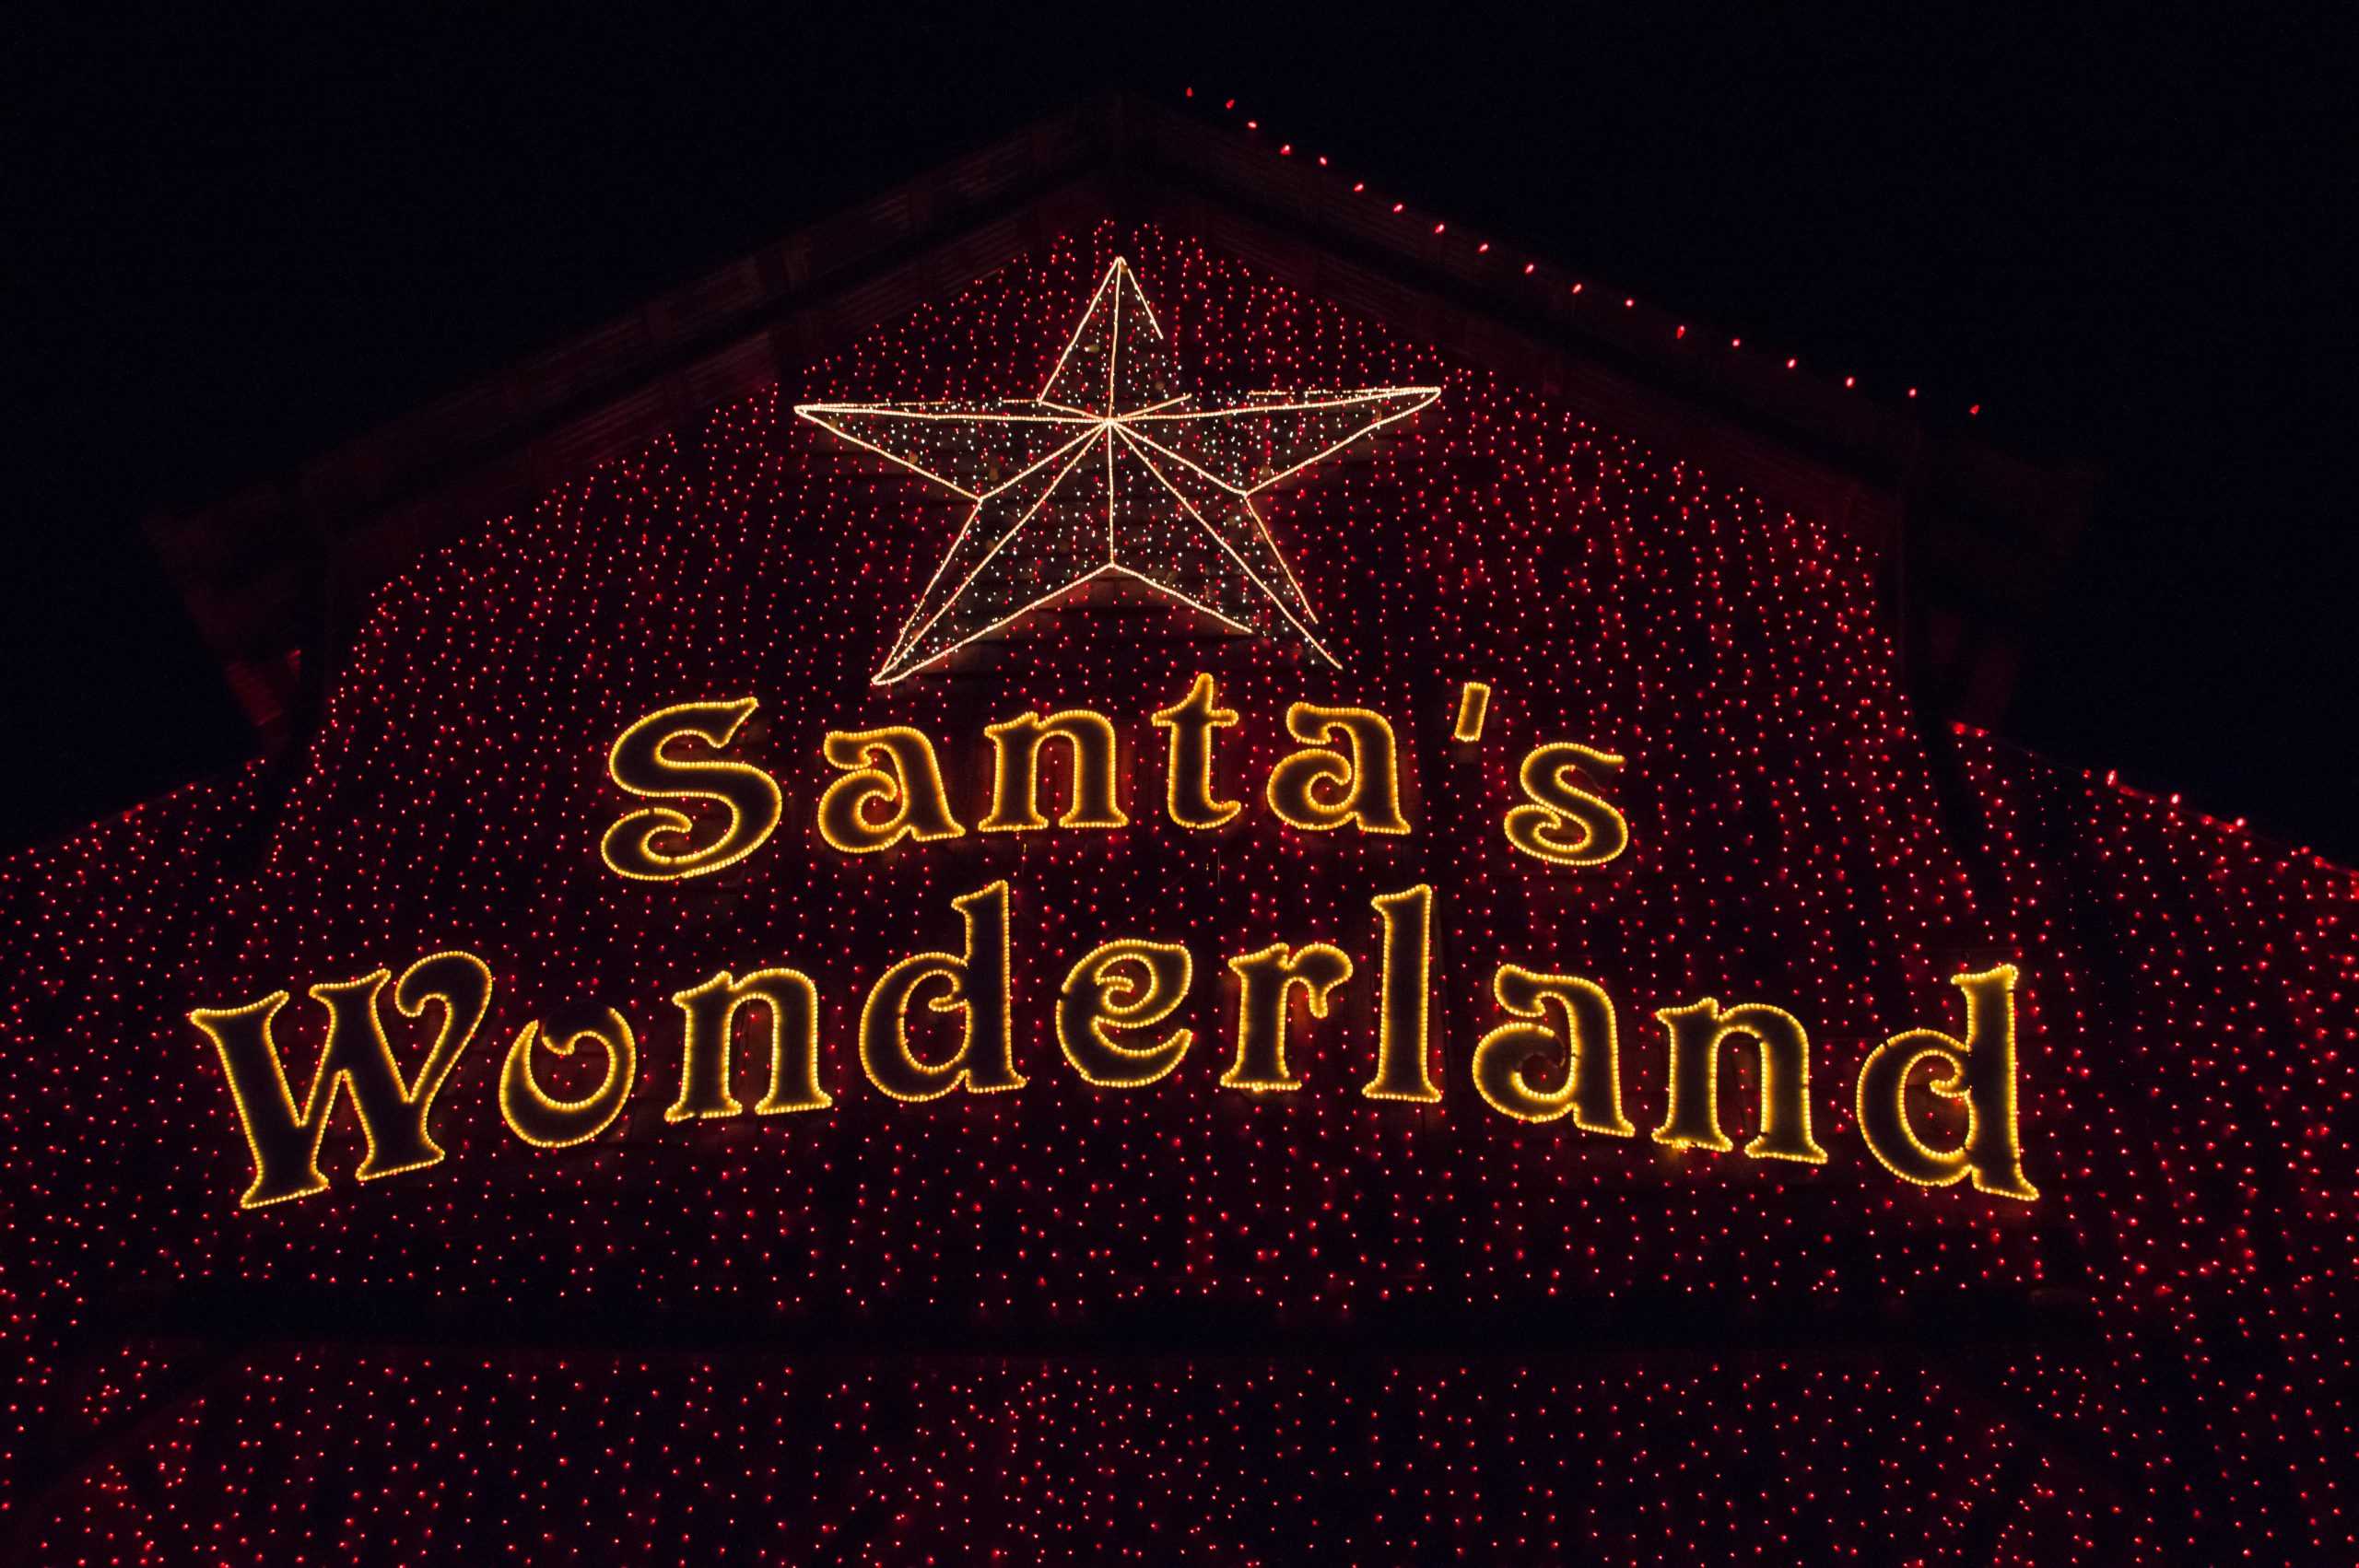 Santa%26%238217%3Bs+Wonderland+makes+a+difference+through+local+charitable+service